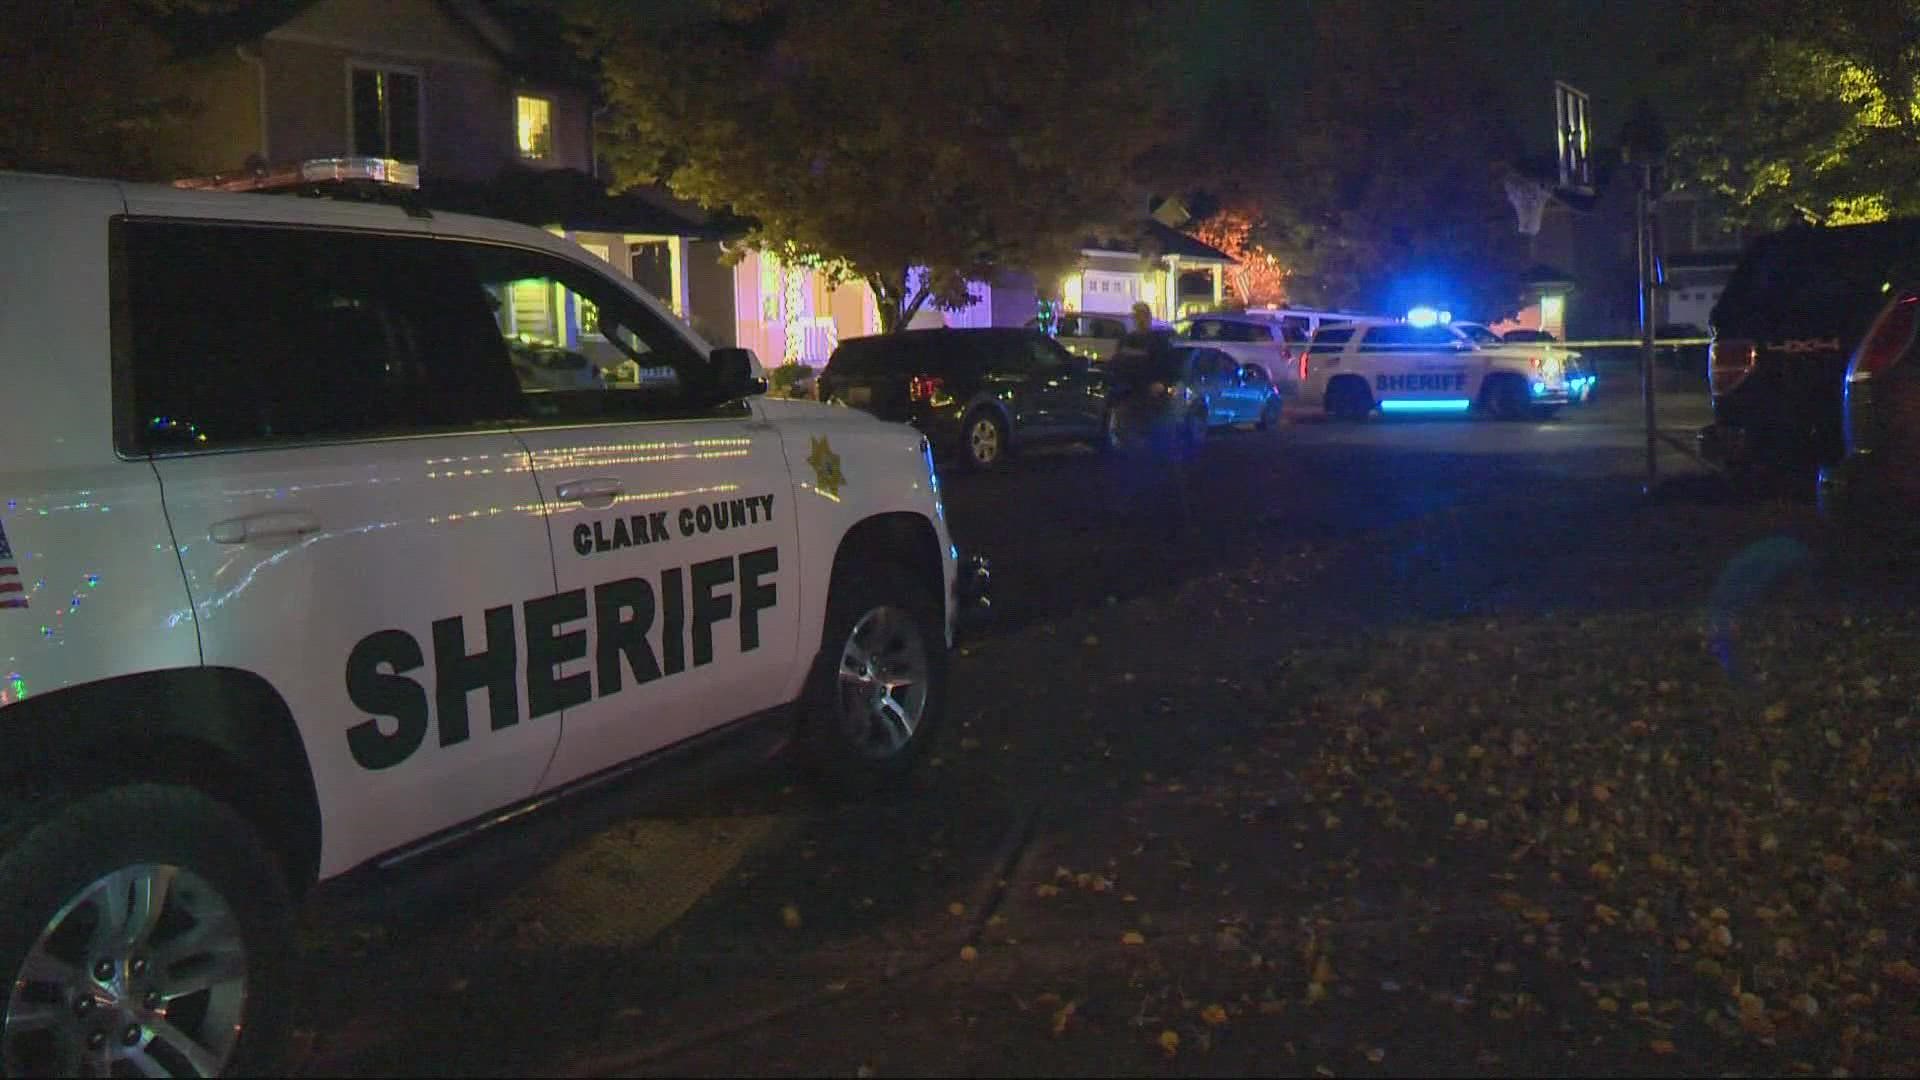 According to deputies, both mother and baby are in critical condition after the shooting.